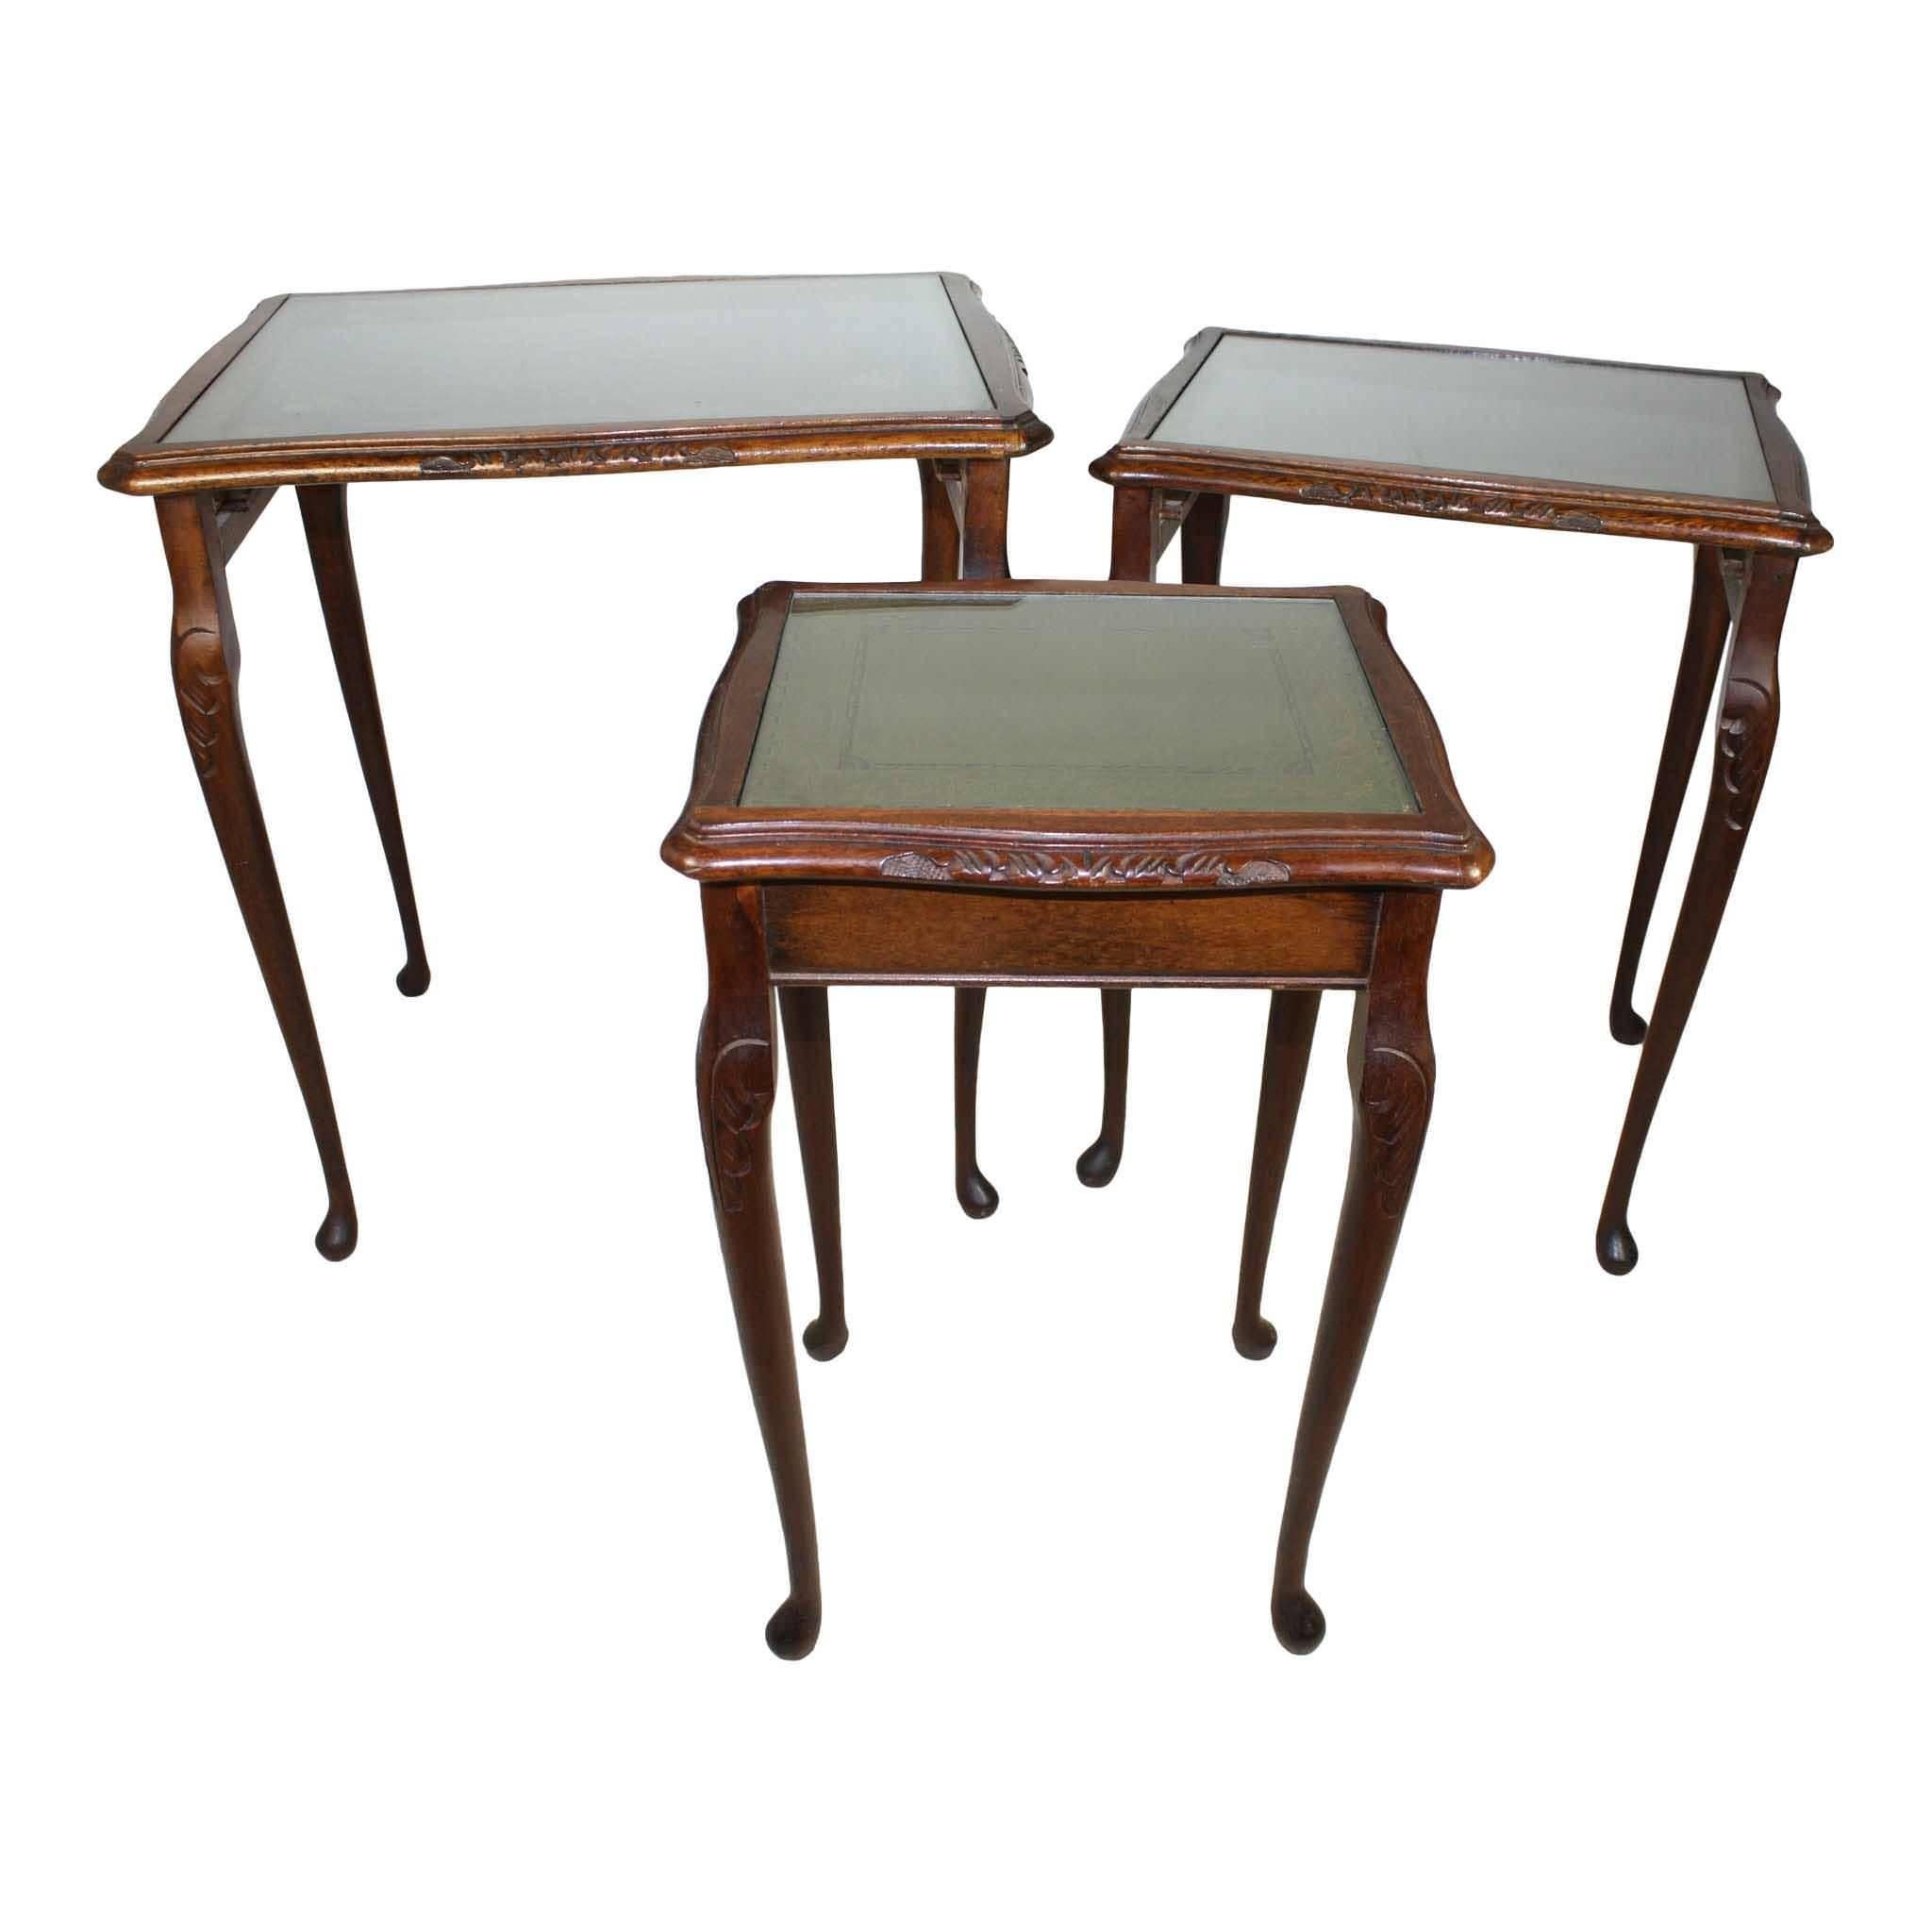 20th Century English Nesting Tables with Gilt Leather Tops, circa 1930